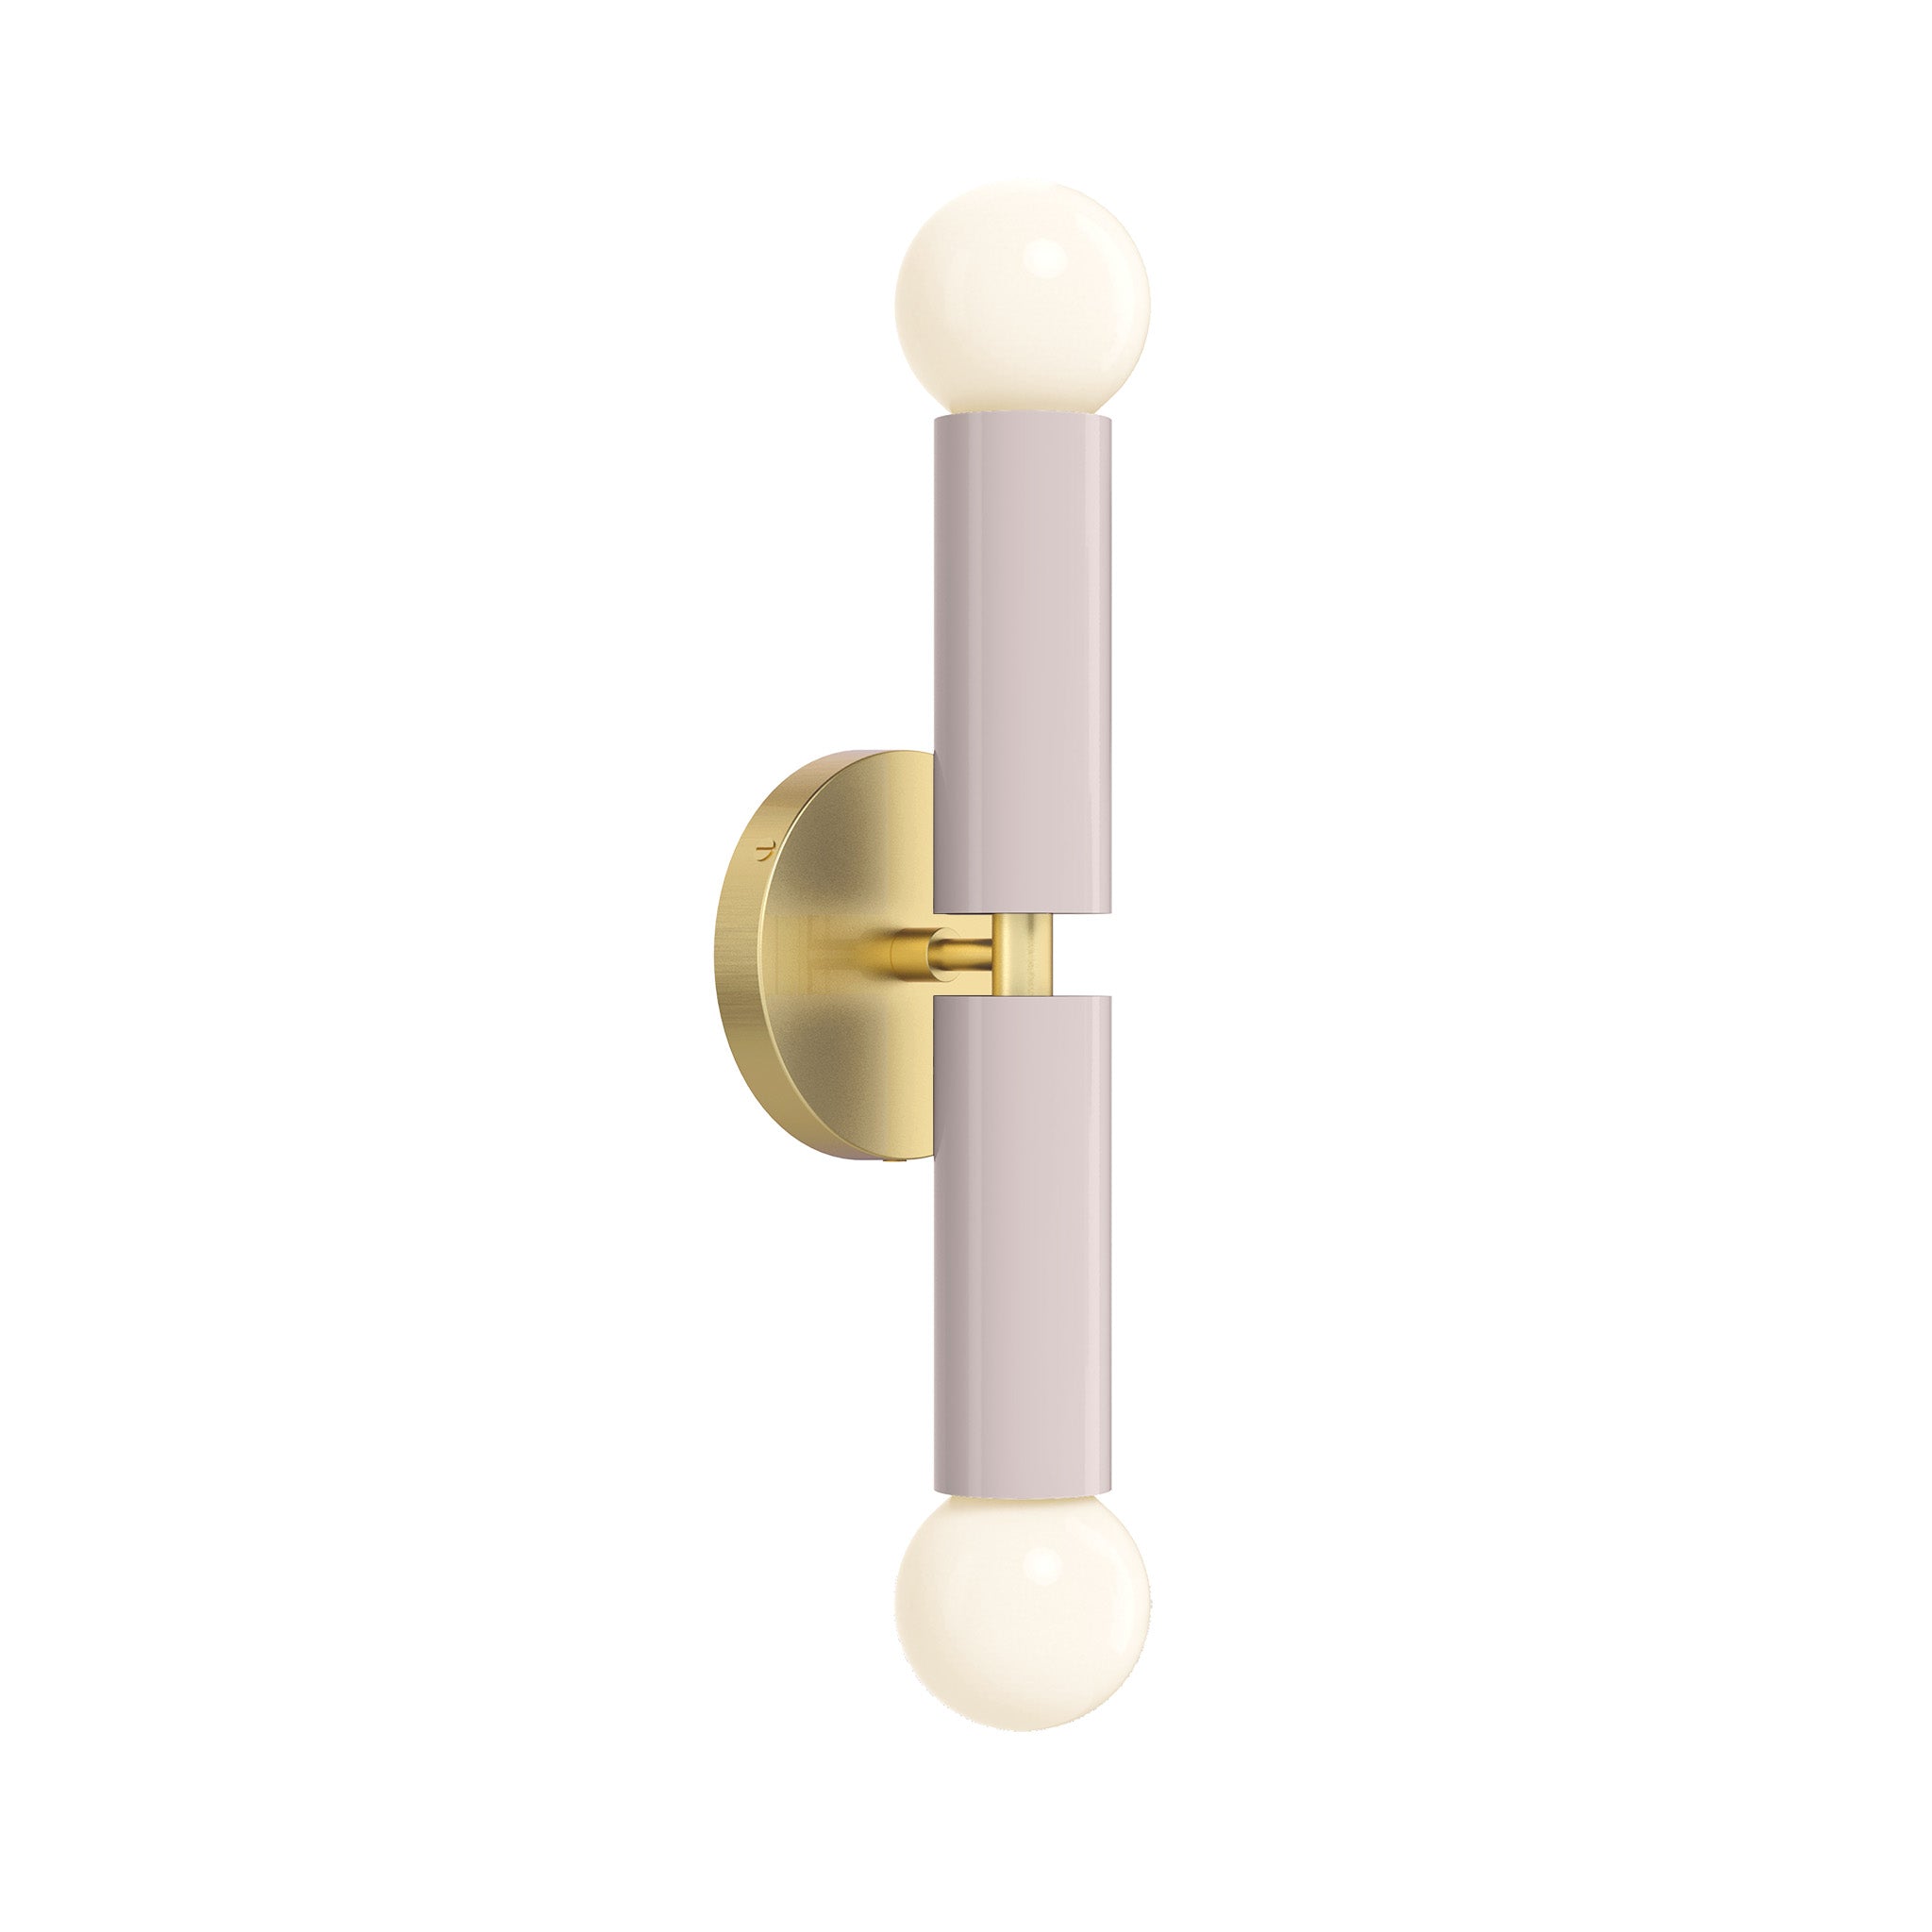 brass barely color monarch sconce dutton brown lighting